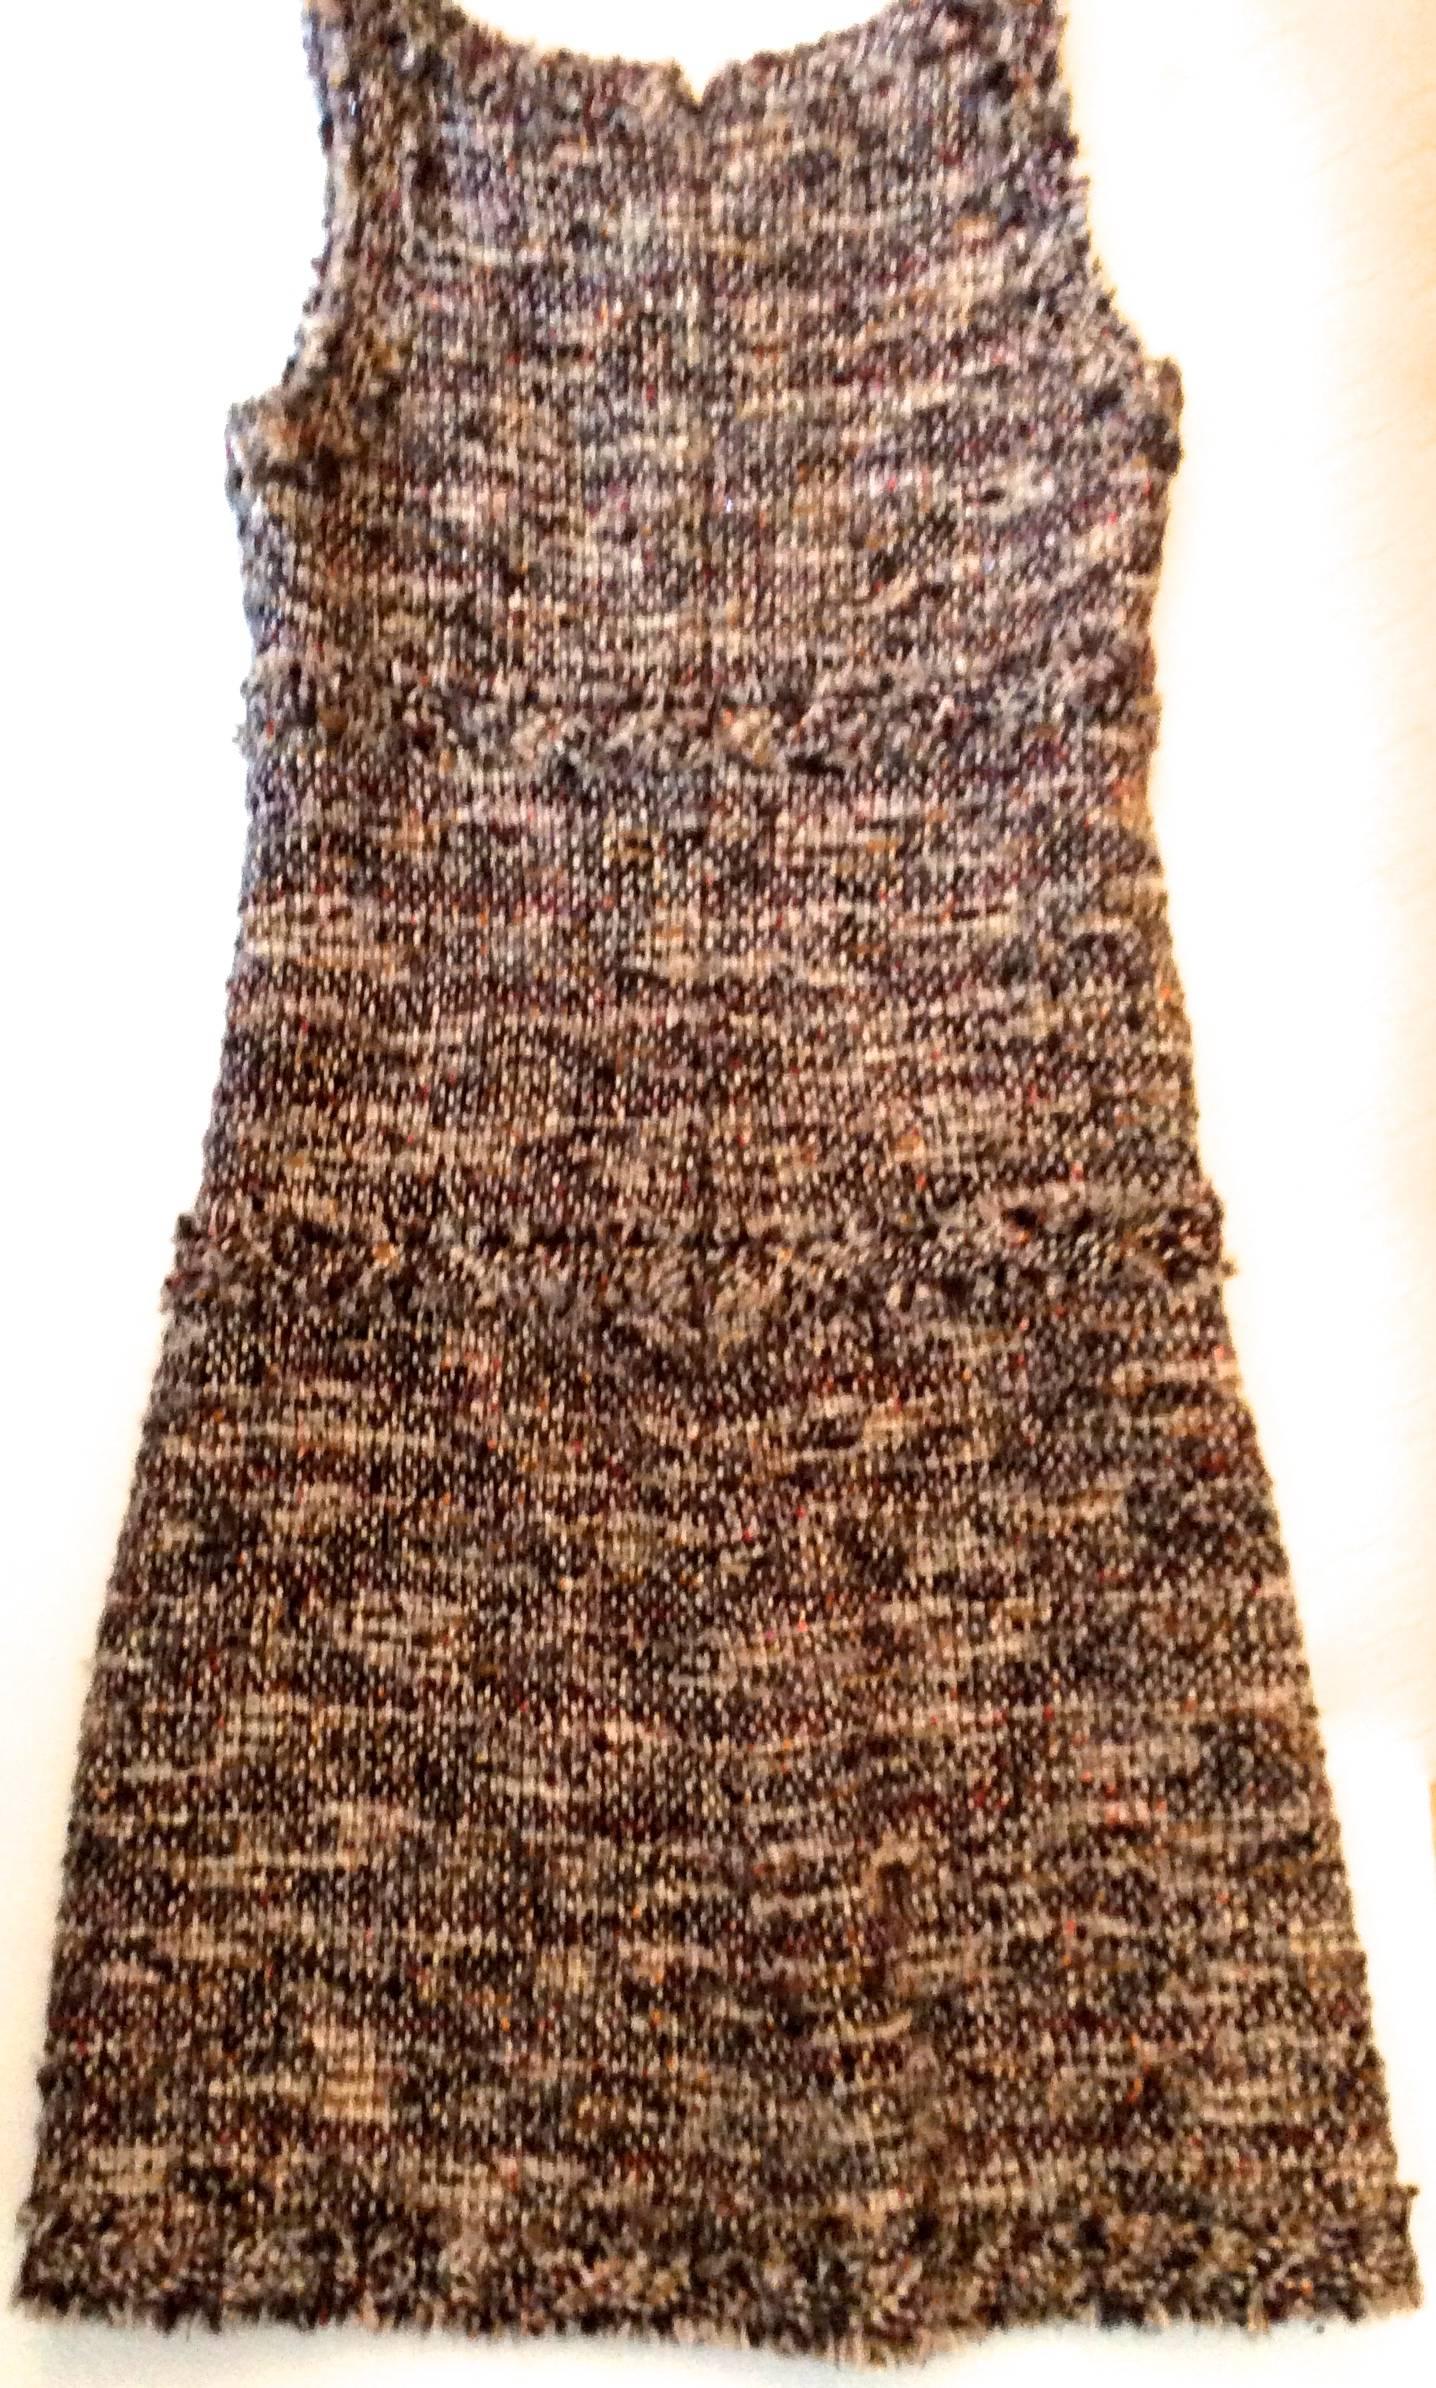 This beautiful sleevless Chanel dress is from the fall of 2007. It is in excellent condition with nearly no signs of use. The boucle fabric has gold threading throughout with beautiful shades of beige, rust, caramel, black, and gray. 

The dress can